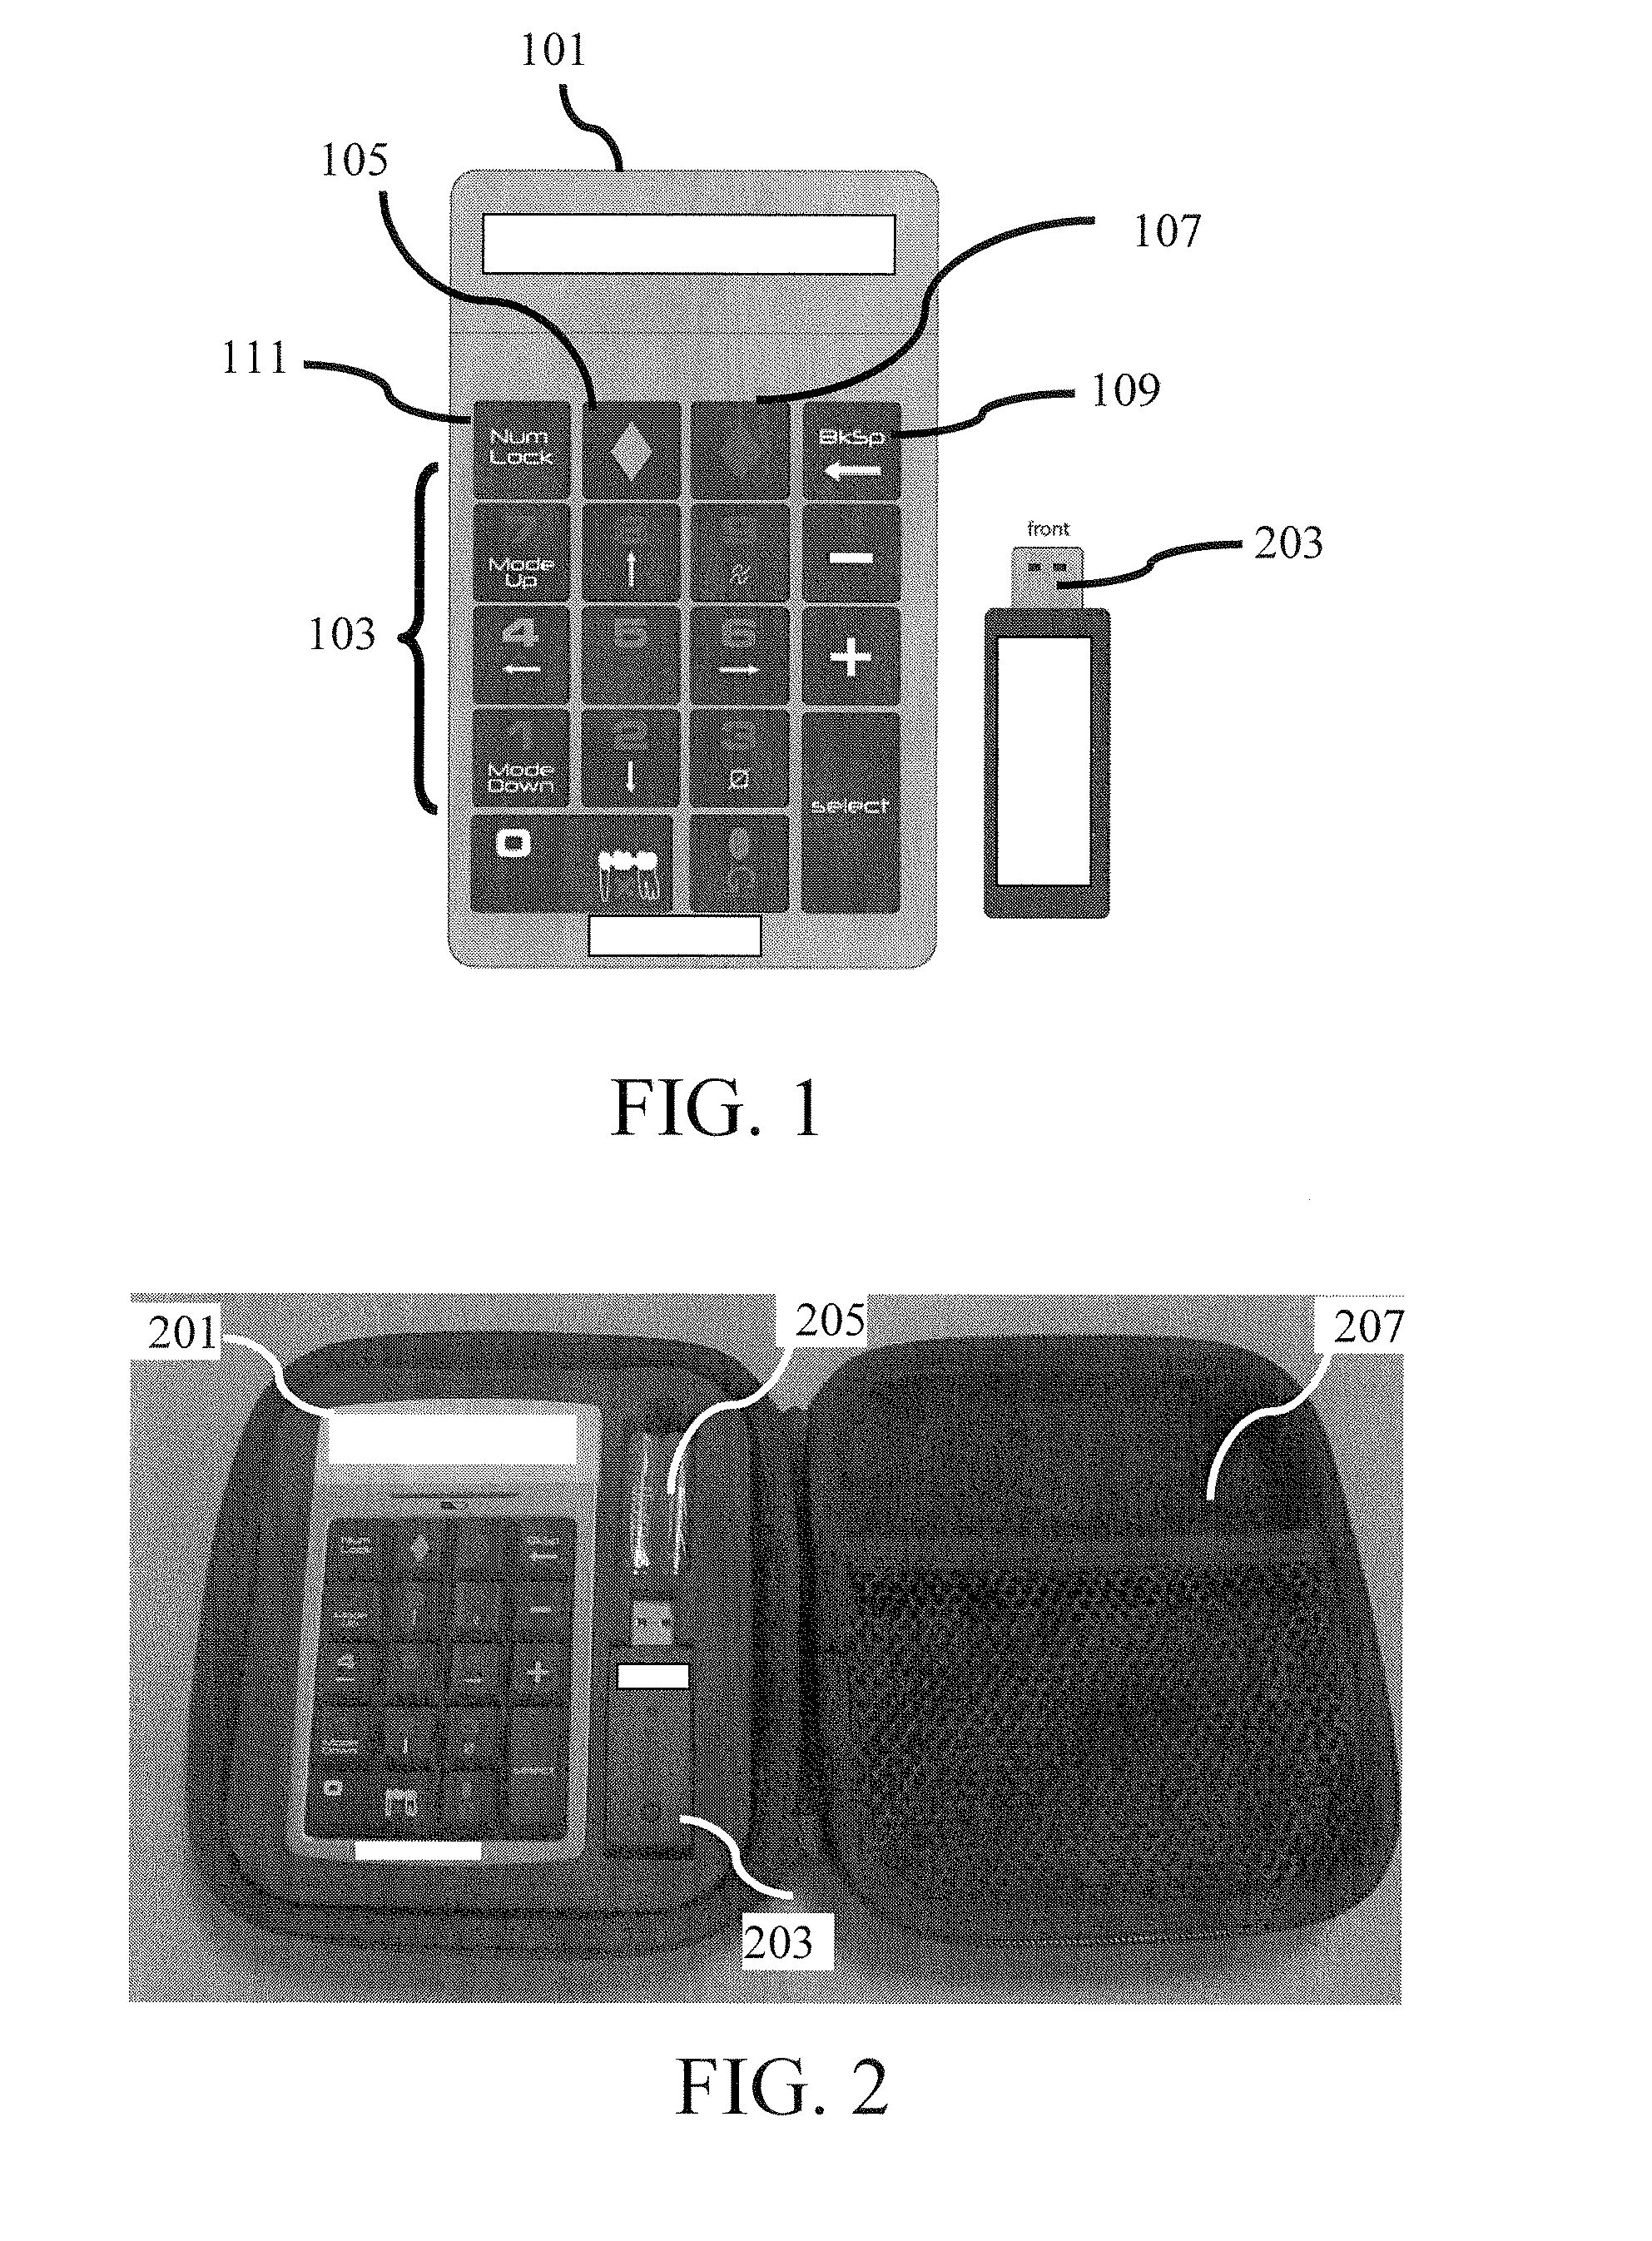 System and method for diagnosis and early treatment adoption for asymptomatic disease